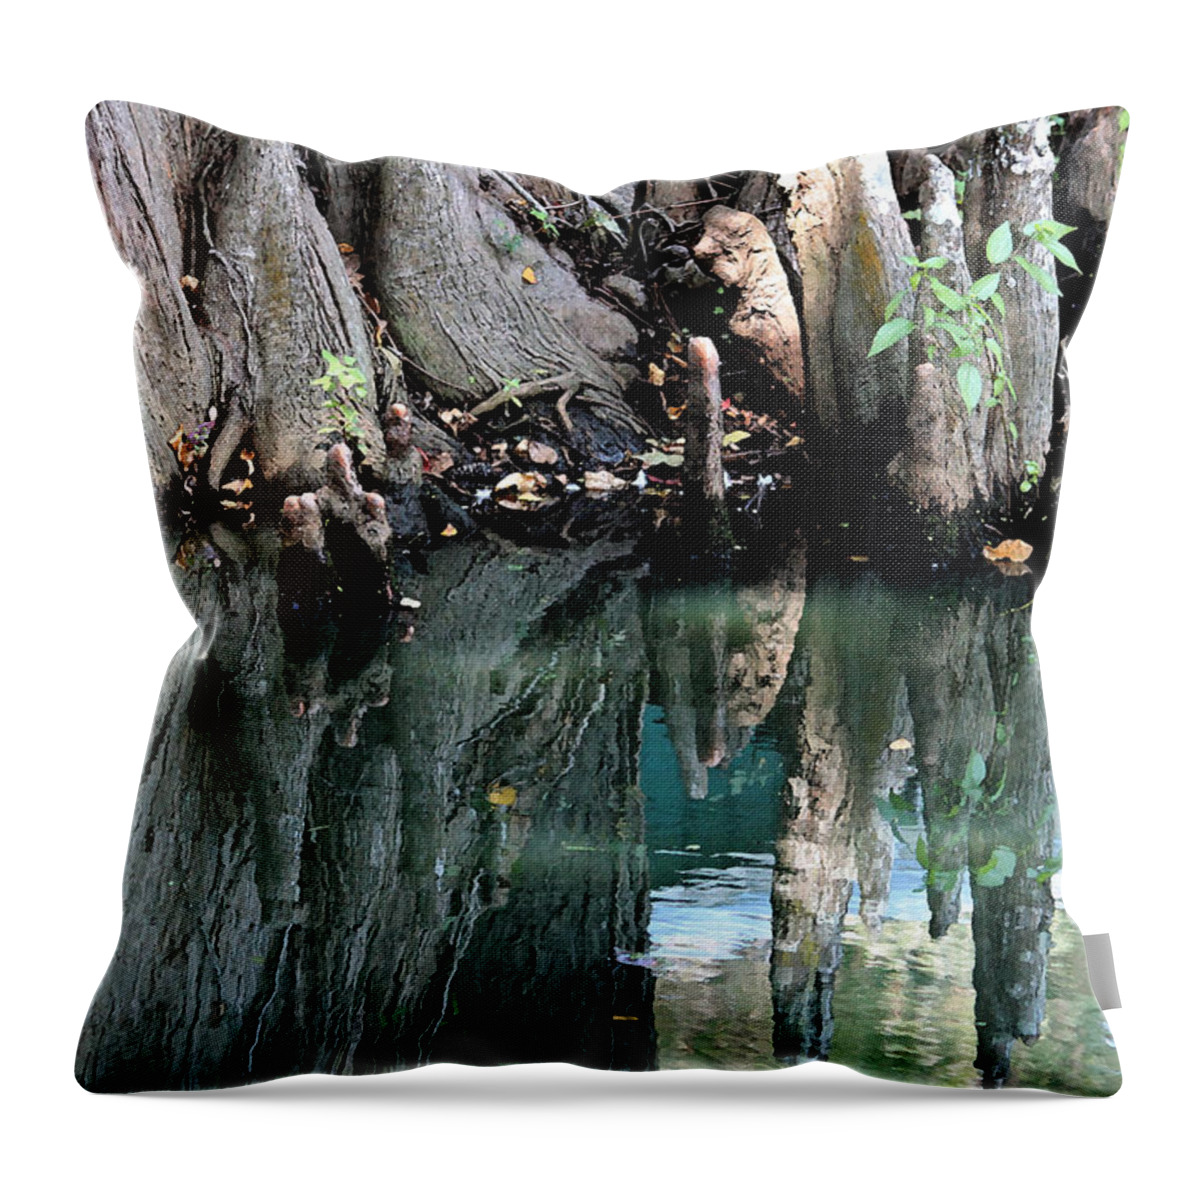 Swamp Throw Pillow featuring the photograph Cypress Swamp in Reflection by Suzanne Gaff